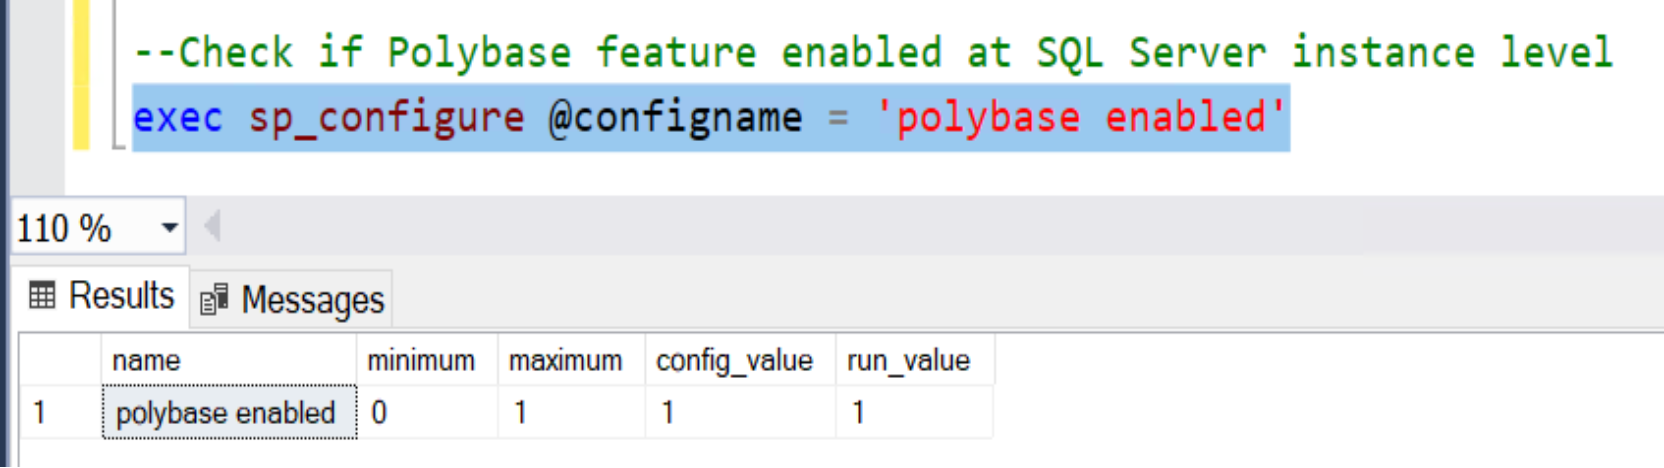 This shows an example to determine whether polybase is enabled.